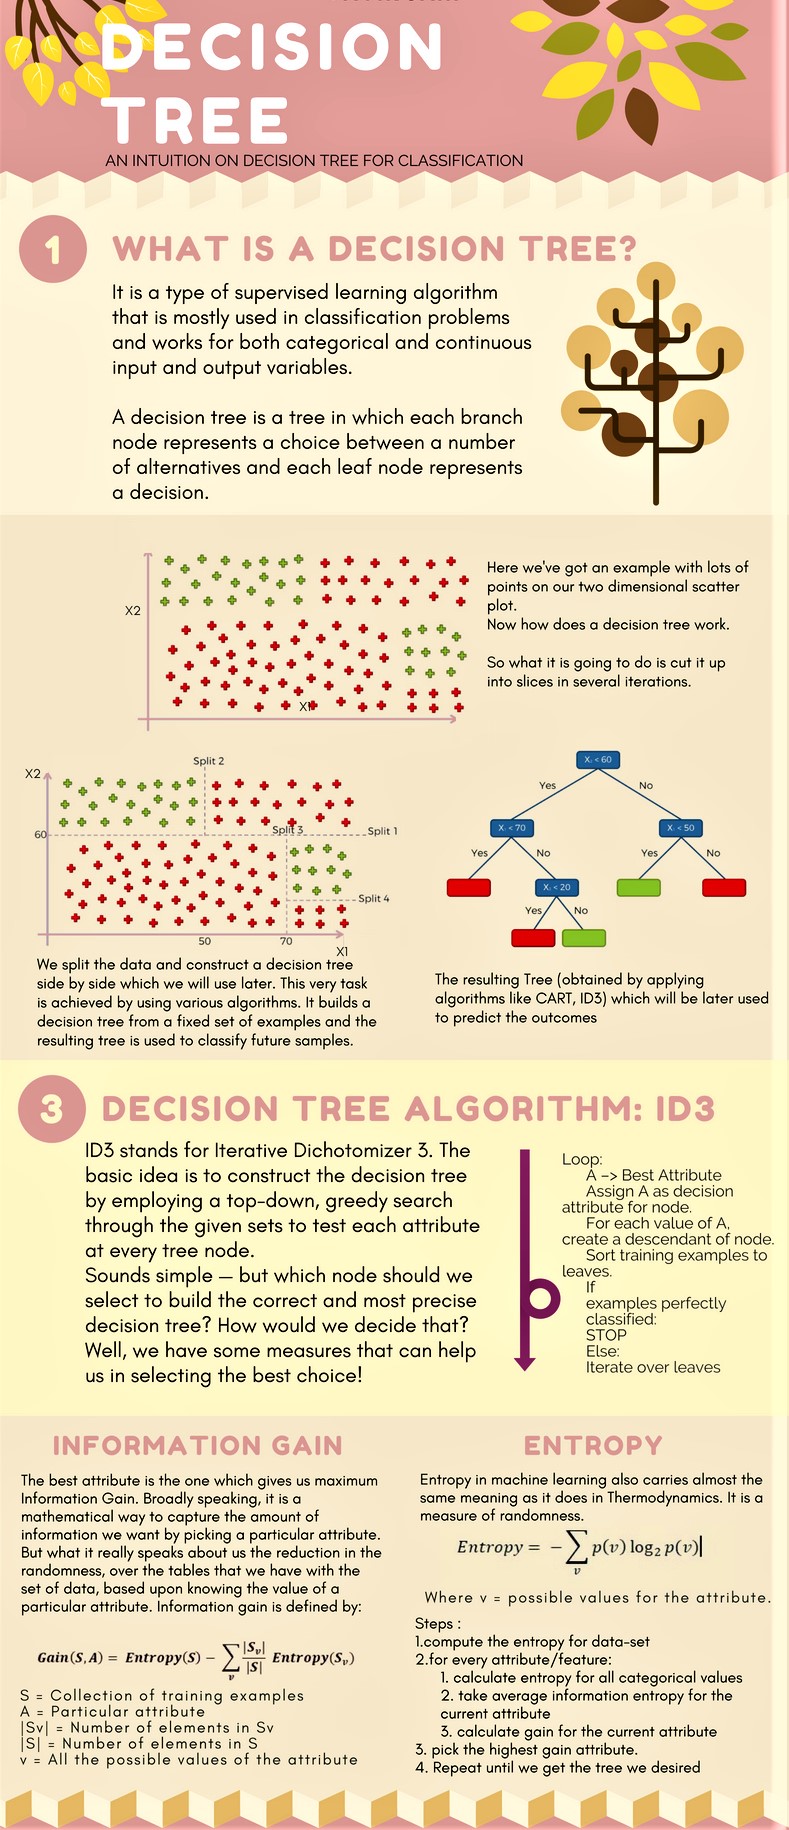 Decision Trees in Machine Learning